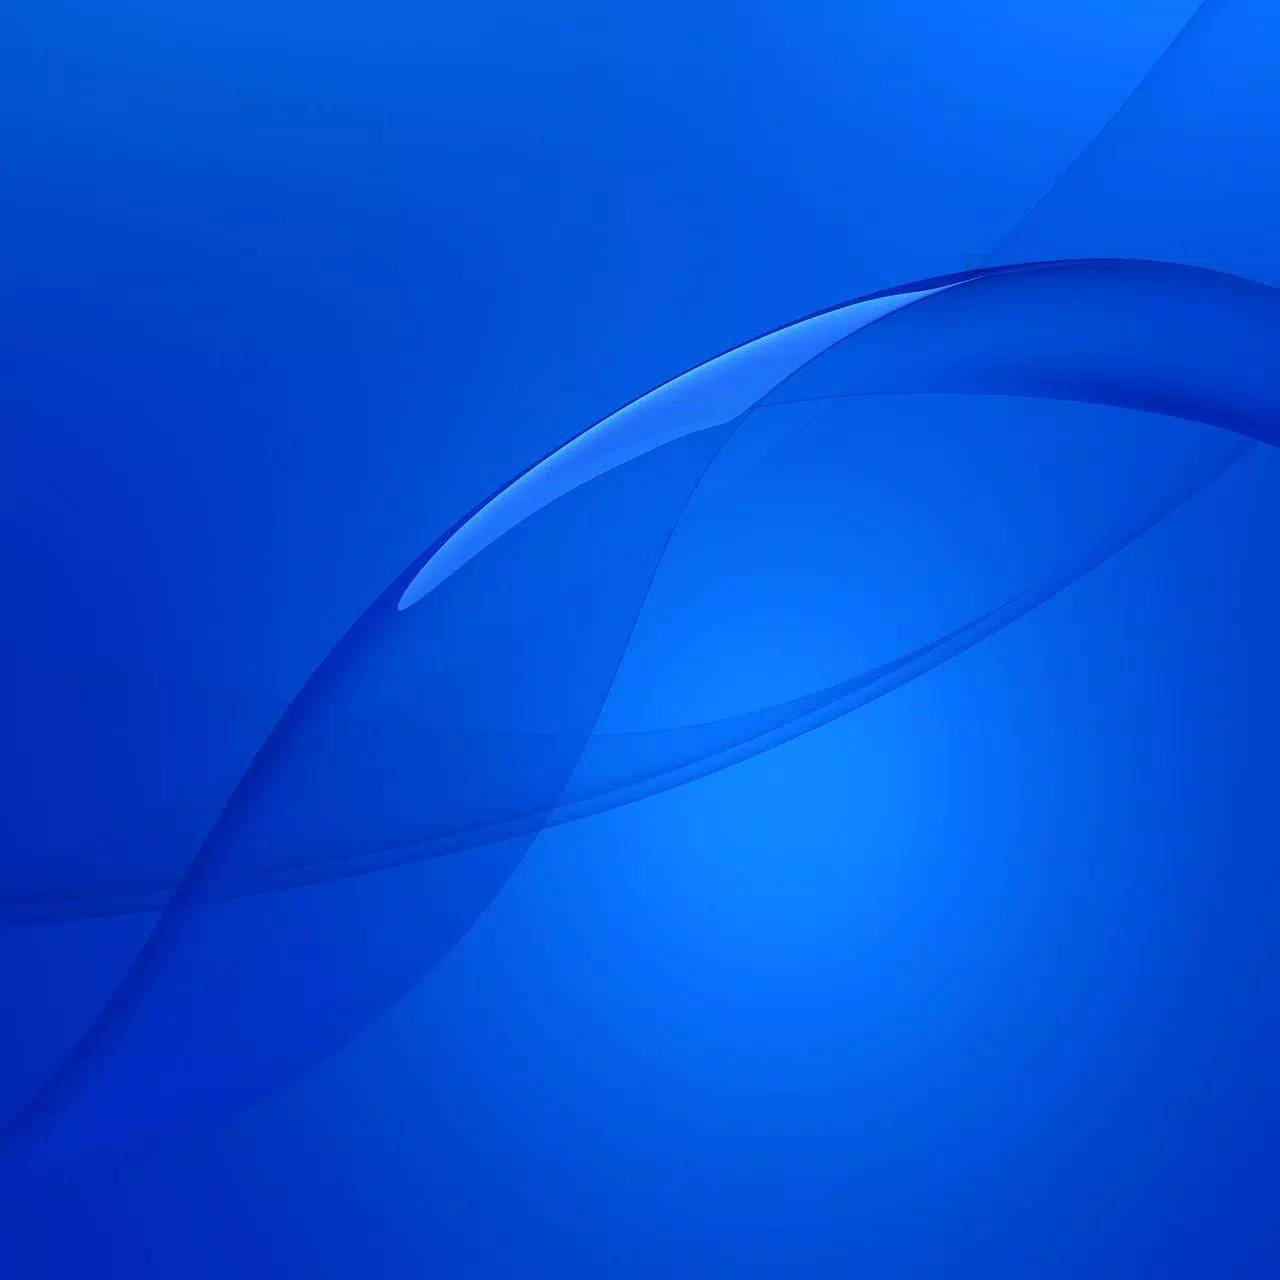 Android向けのwallpapers For Sony Xperia Z5 Z4 Z3 Z2 Z1 Apkをダウンロードしましょう